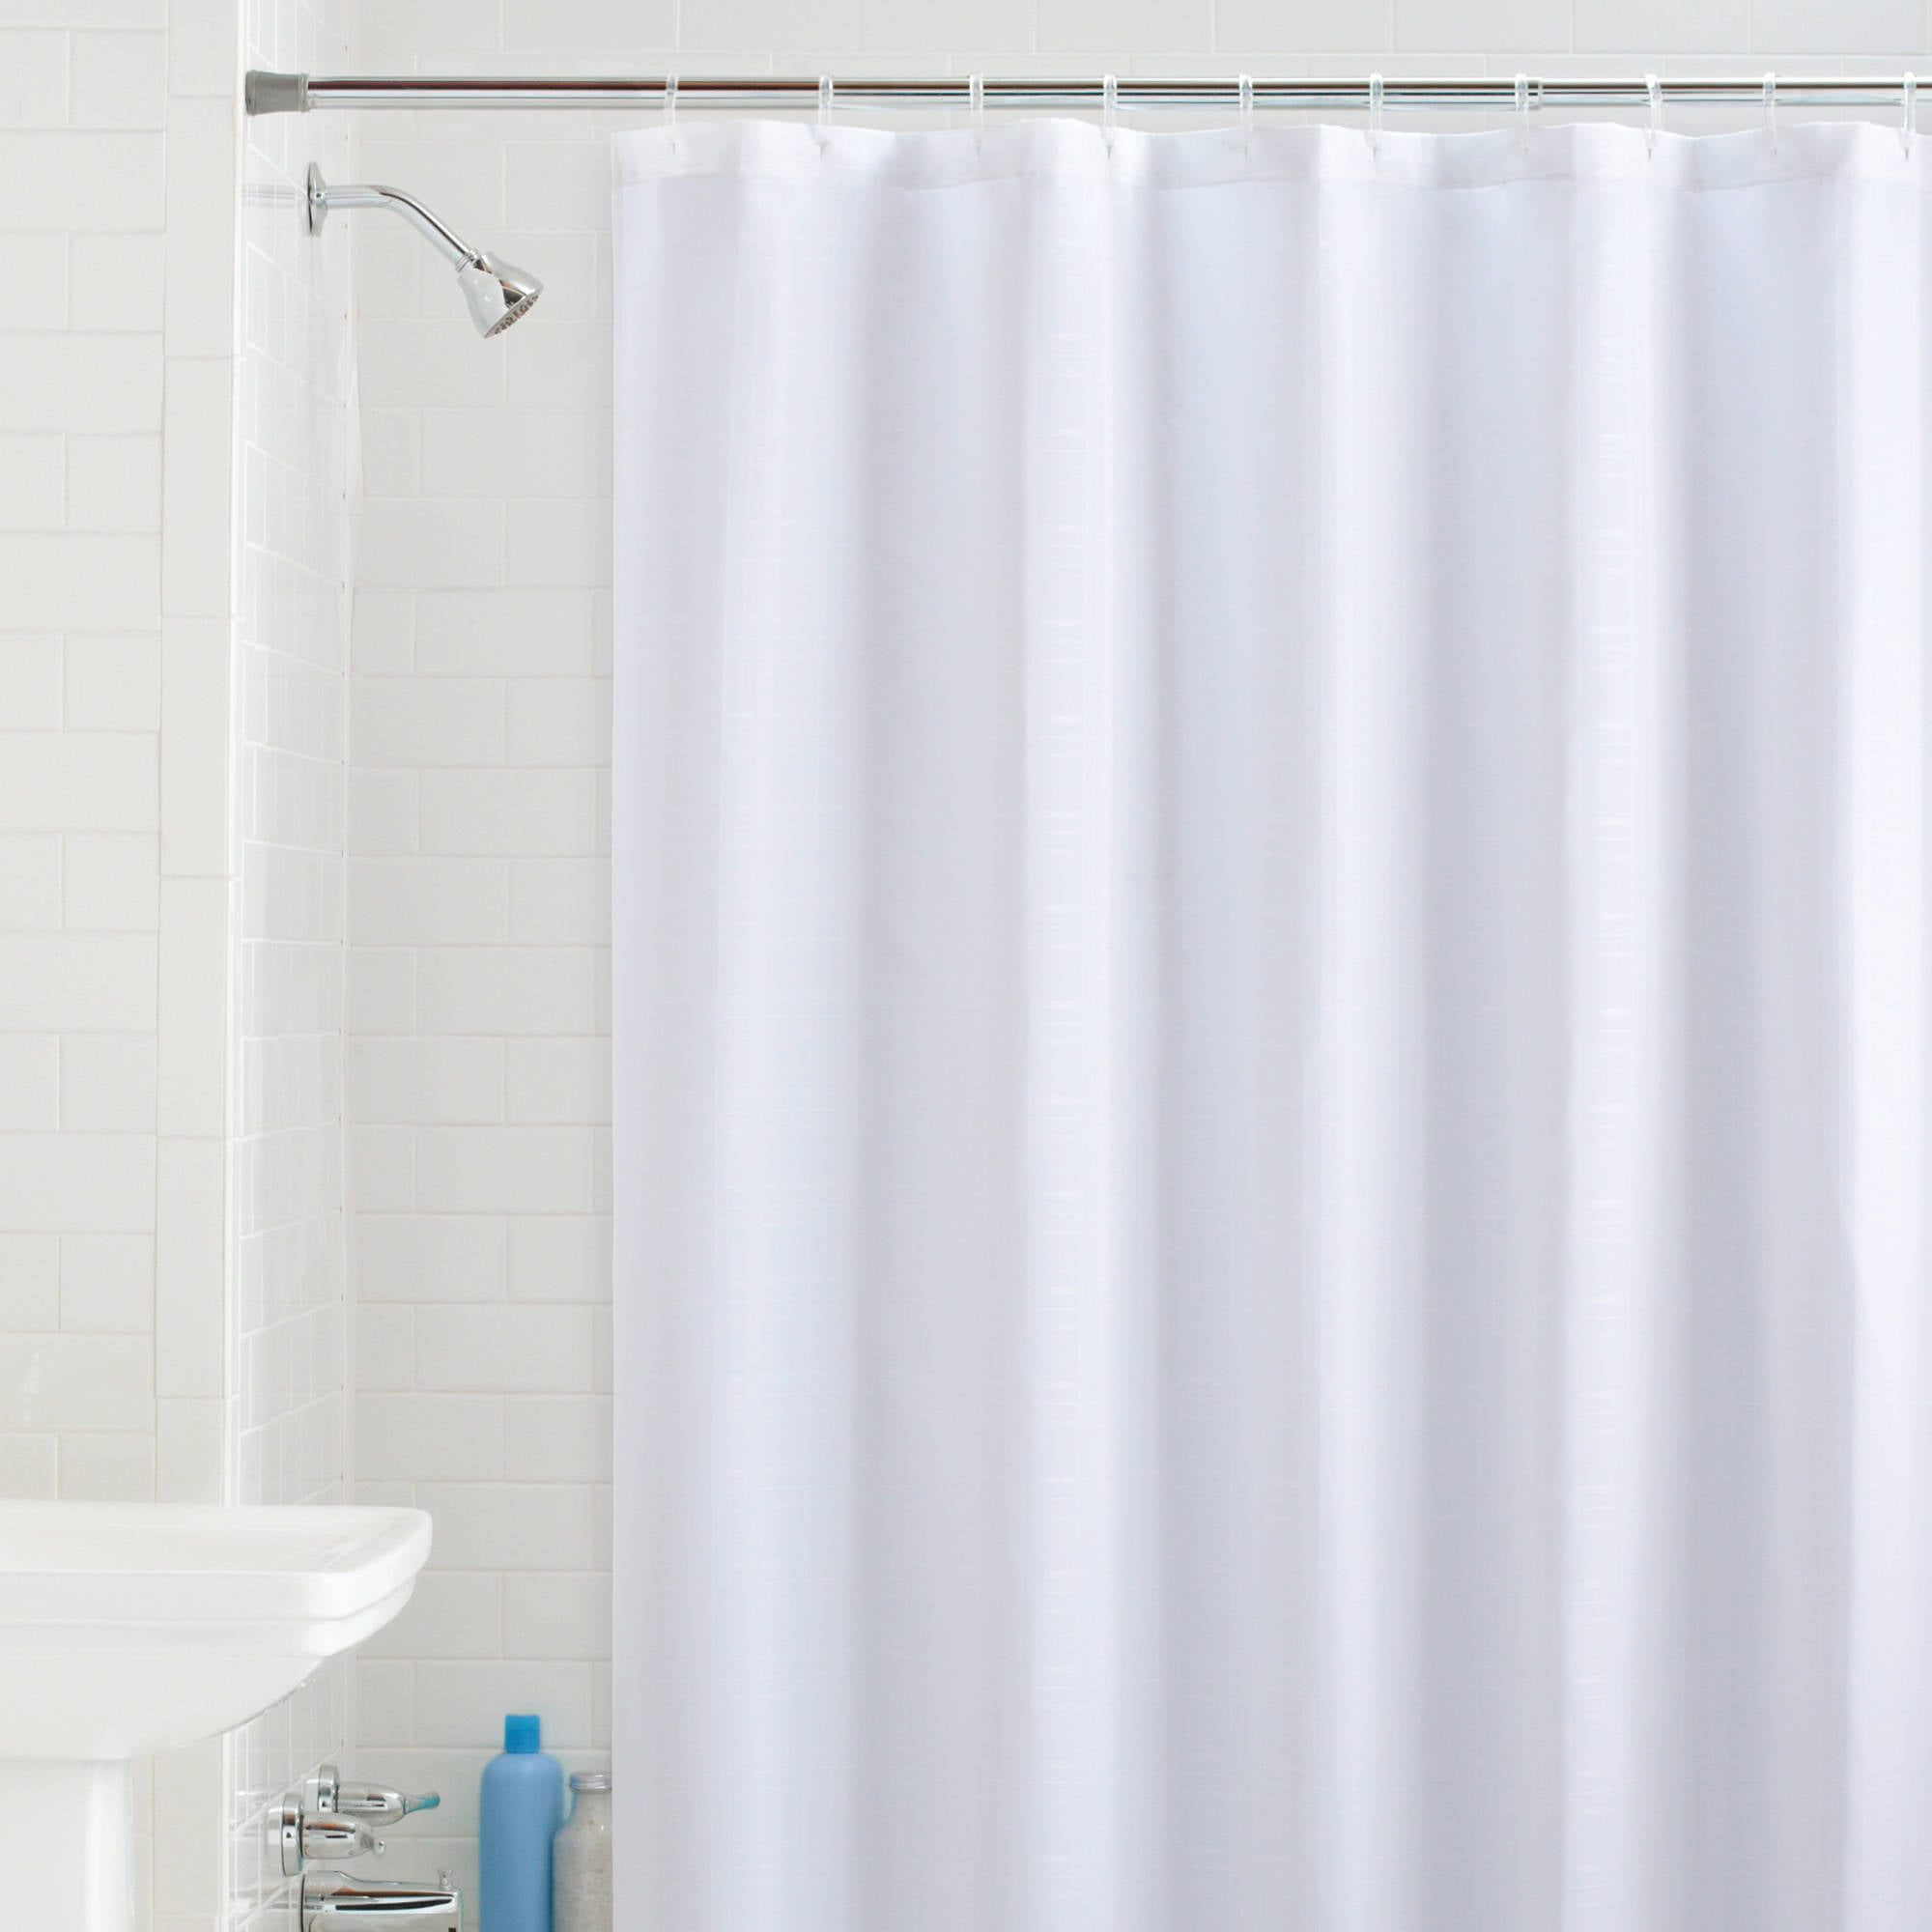 Mildew Resistant Fabric Shower Curtain, Antimicrobial Shower Curtains